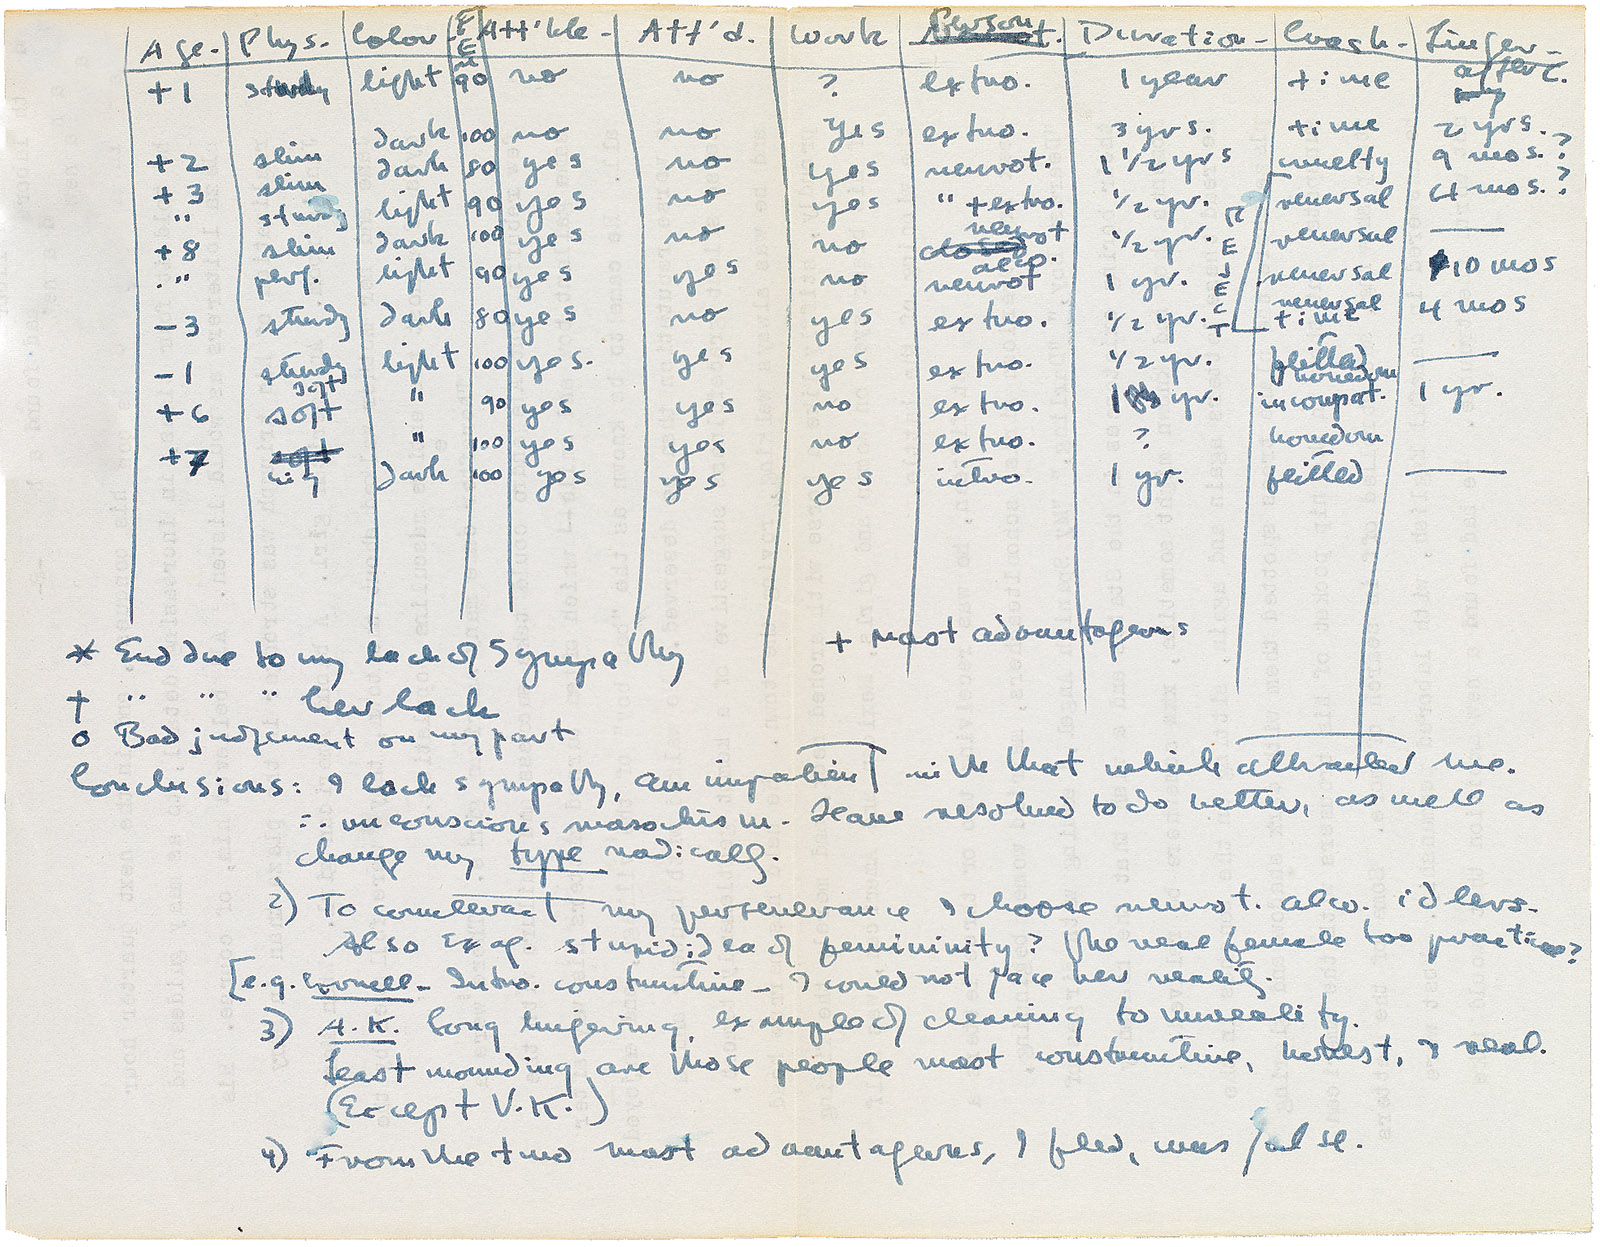 A chart from Patricia Highsmith’s 1945 diaries in which she compared her lovers